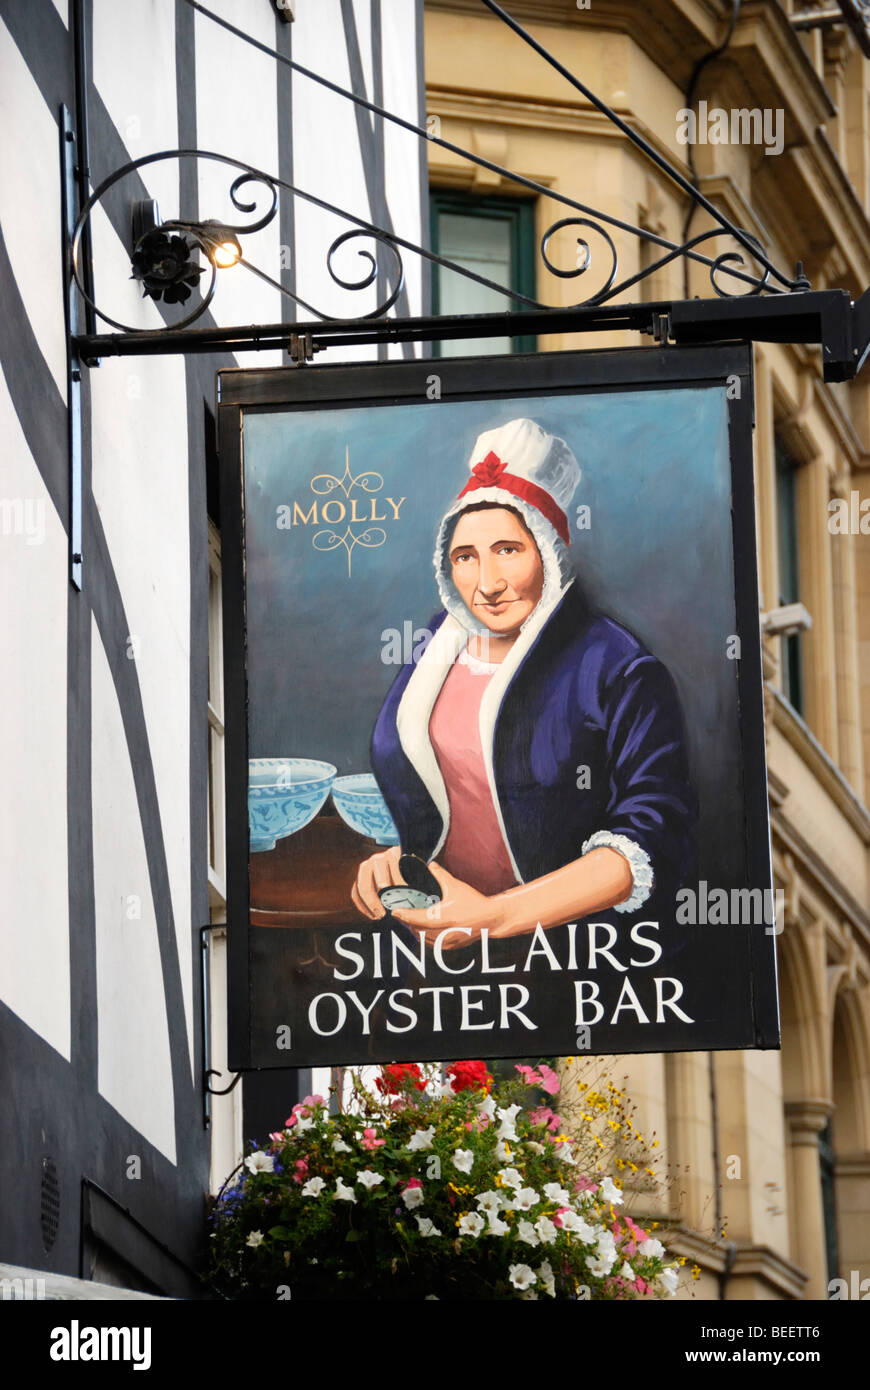 Sinclairs Oyster Bar in Cathedral Gates, Manchester, England, UK. The pub dates back to 1720. Stock Photo